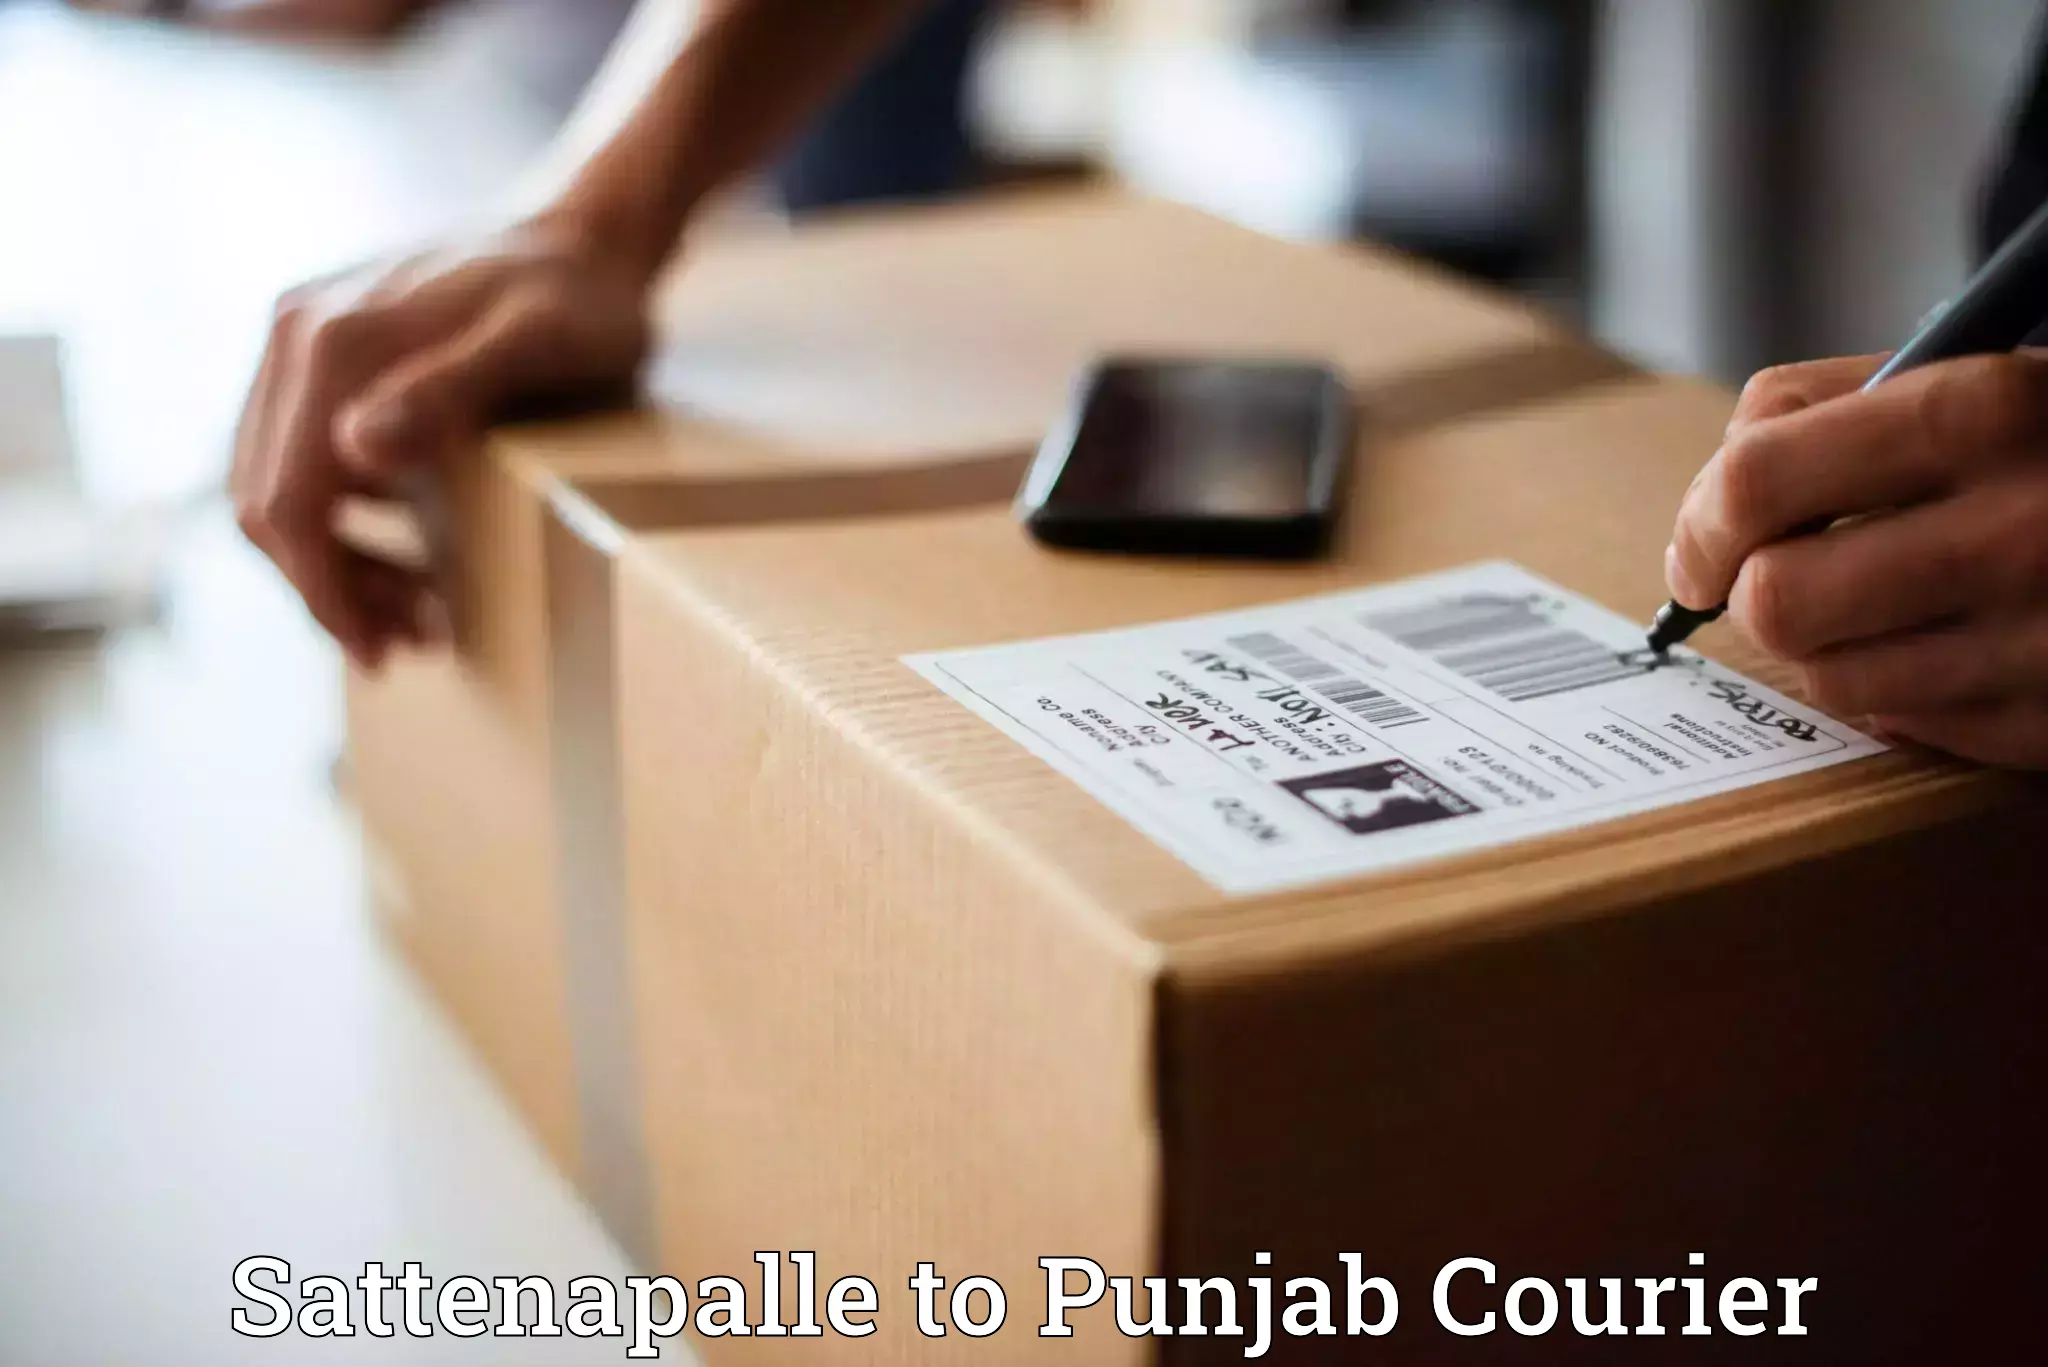 Bulk courier orders Sattenapalle to Amritsar